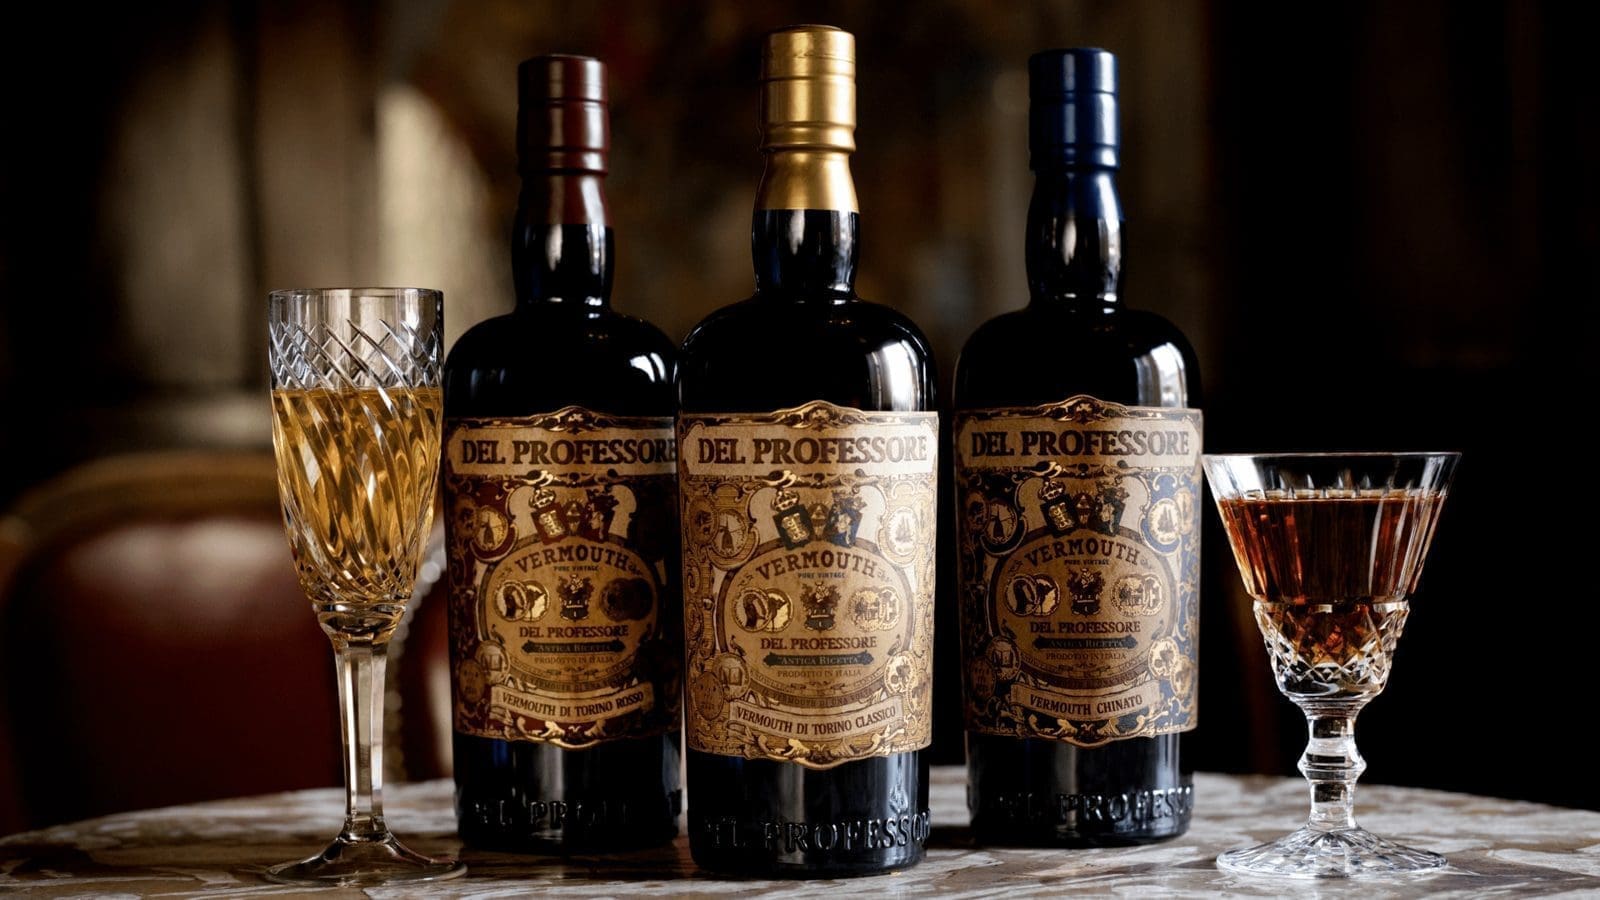 Campari Group acquires Del Professore to cement position in premium craft vermouth and gin space